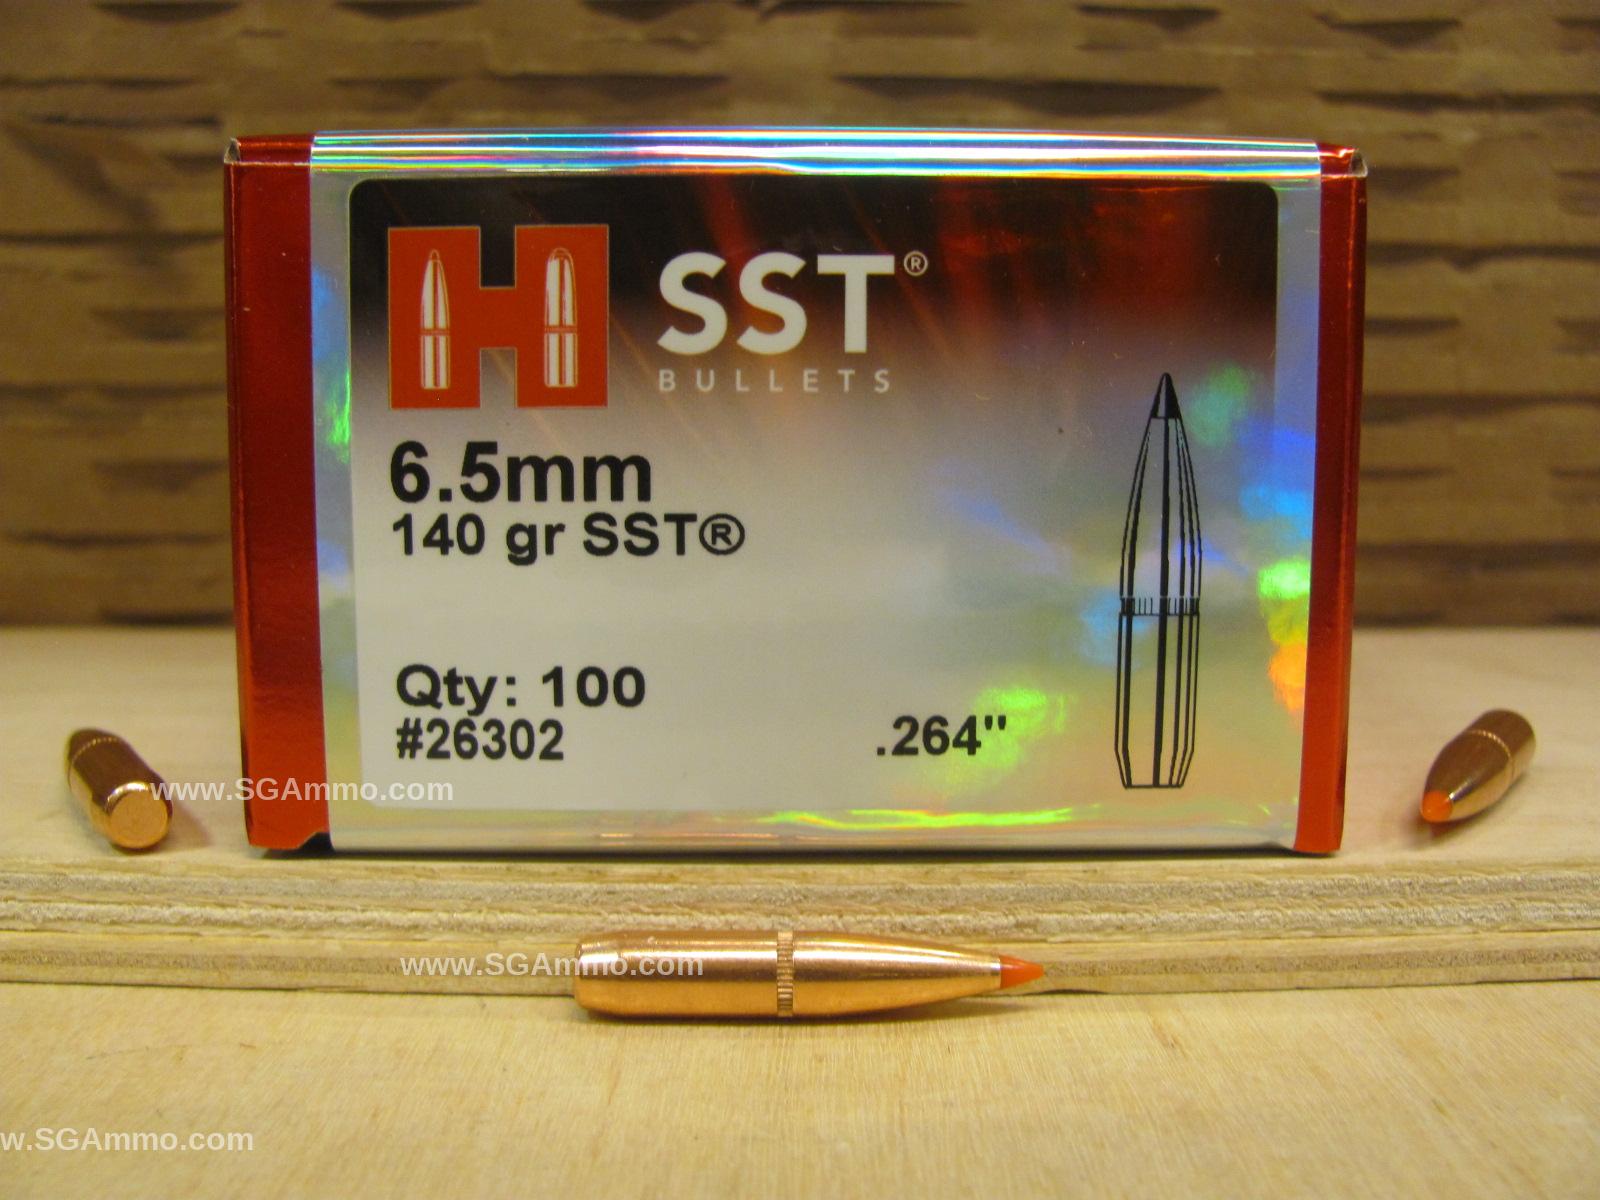 100 Count Box - 6.5mm 140 Grain SST Projectile For Handloading .264